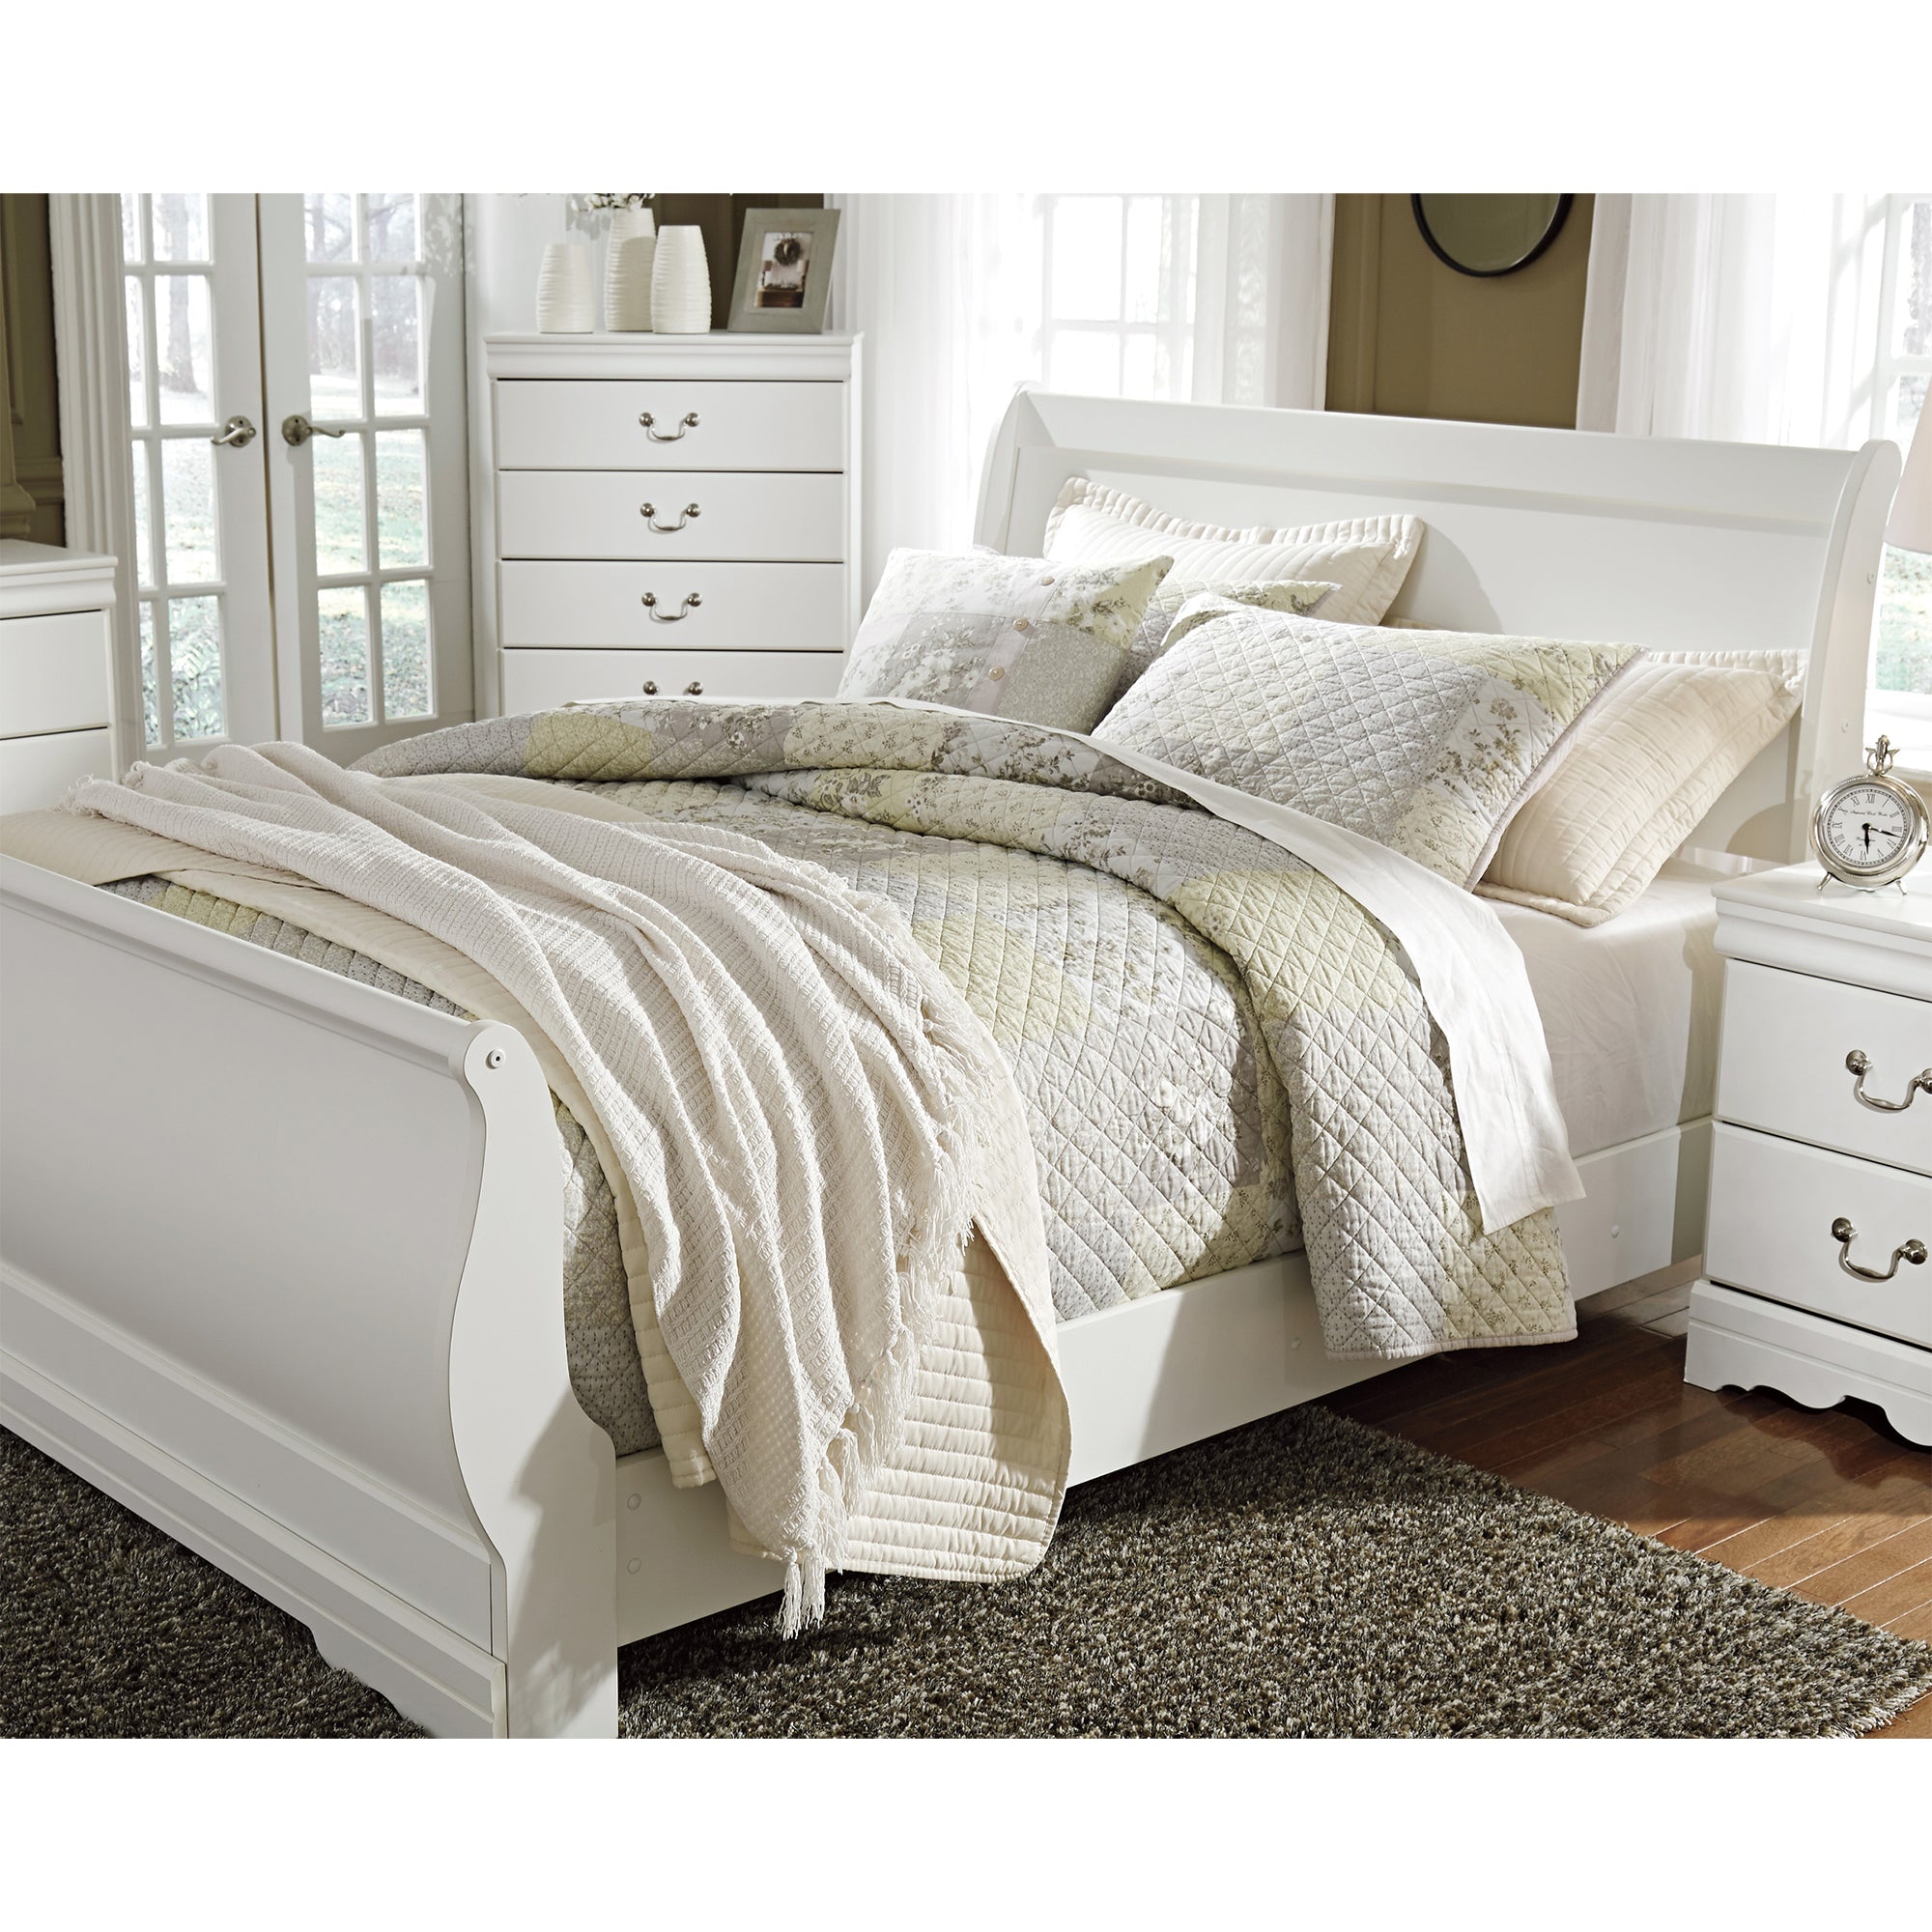 Anarasia Full Sleigh Bed with Mirrored Dresser